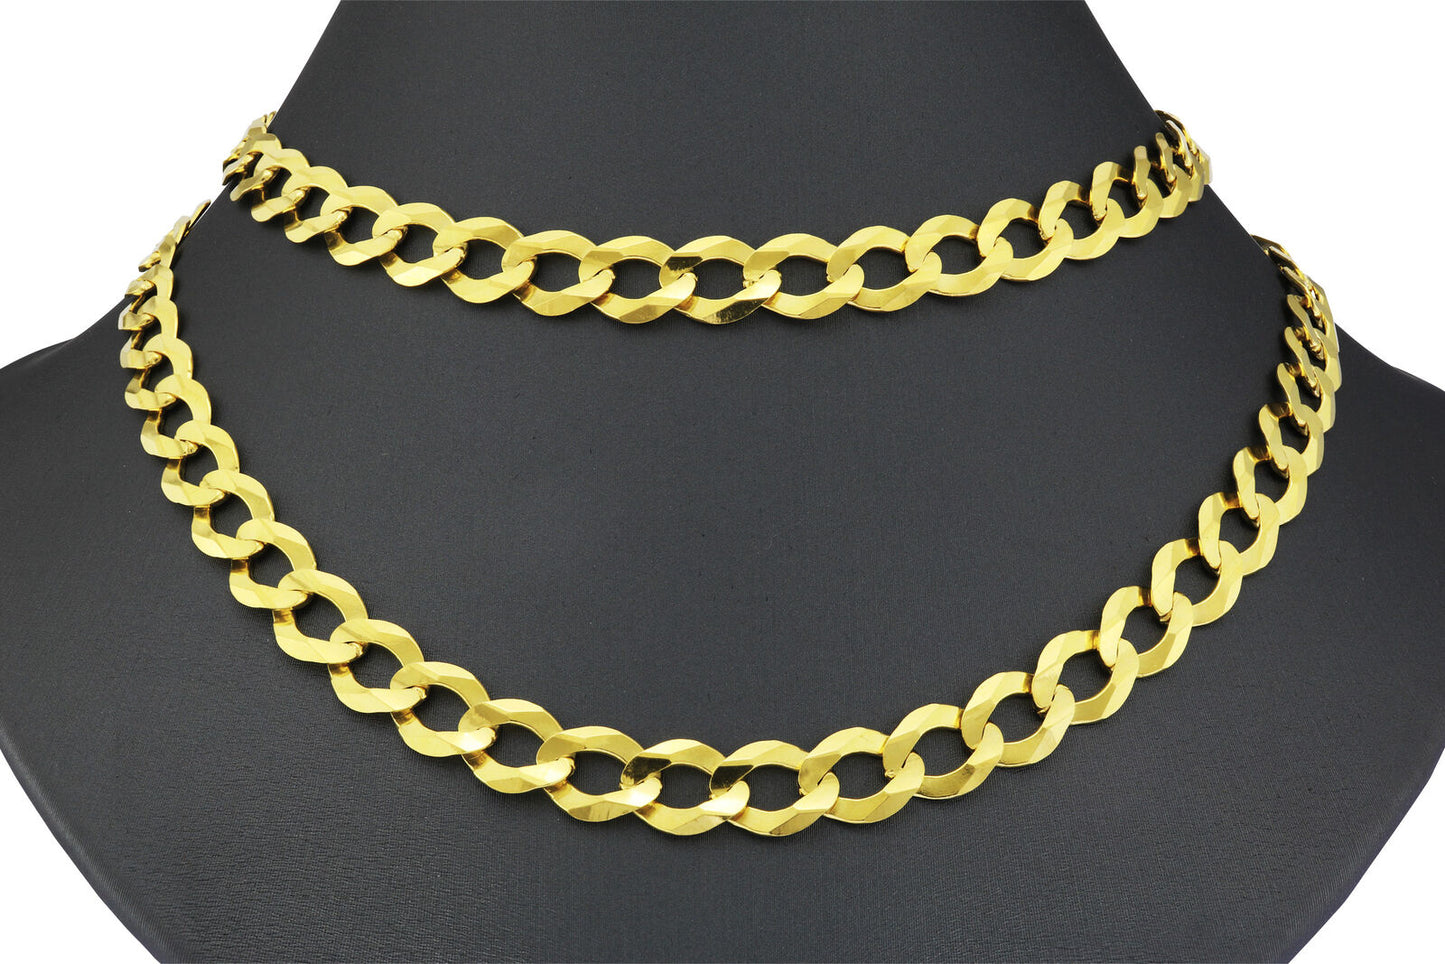 Real 10k Yellow Gold Cuban Curb Link Chain 8mm Necklace 22'' Lobster Lock 10kt